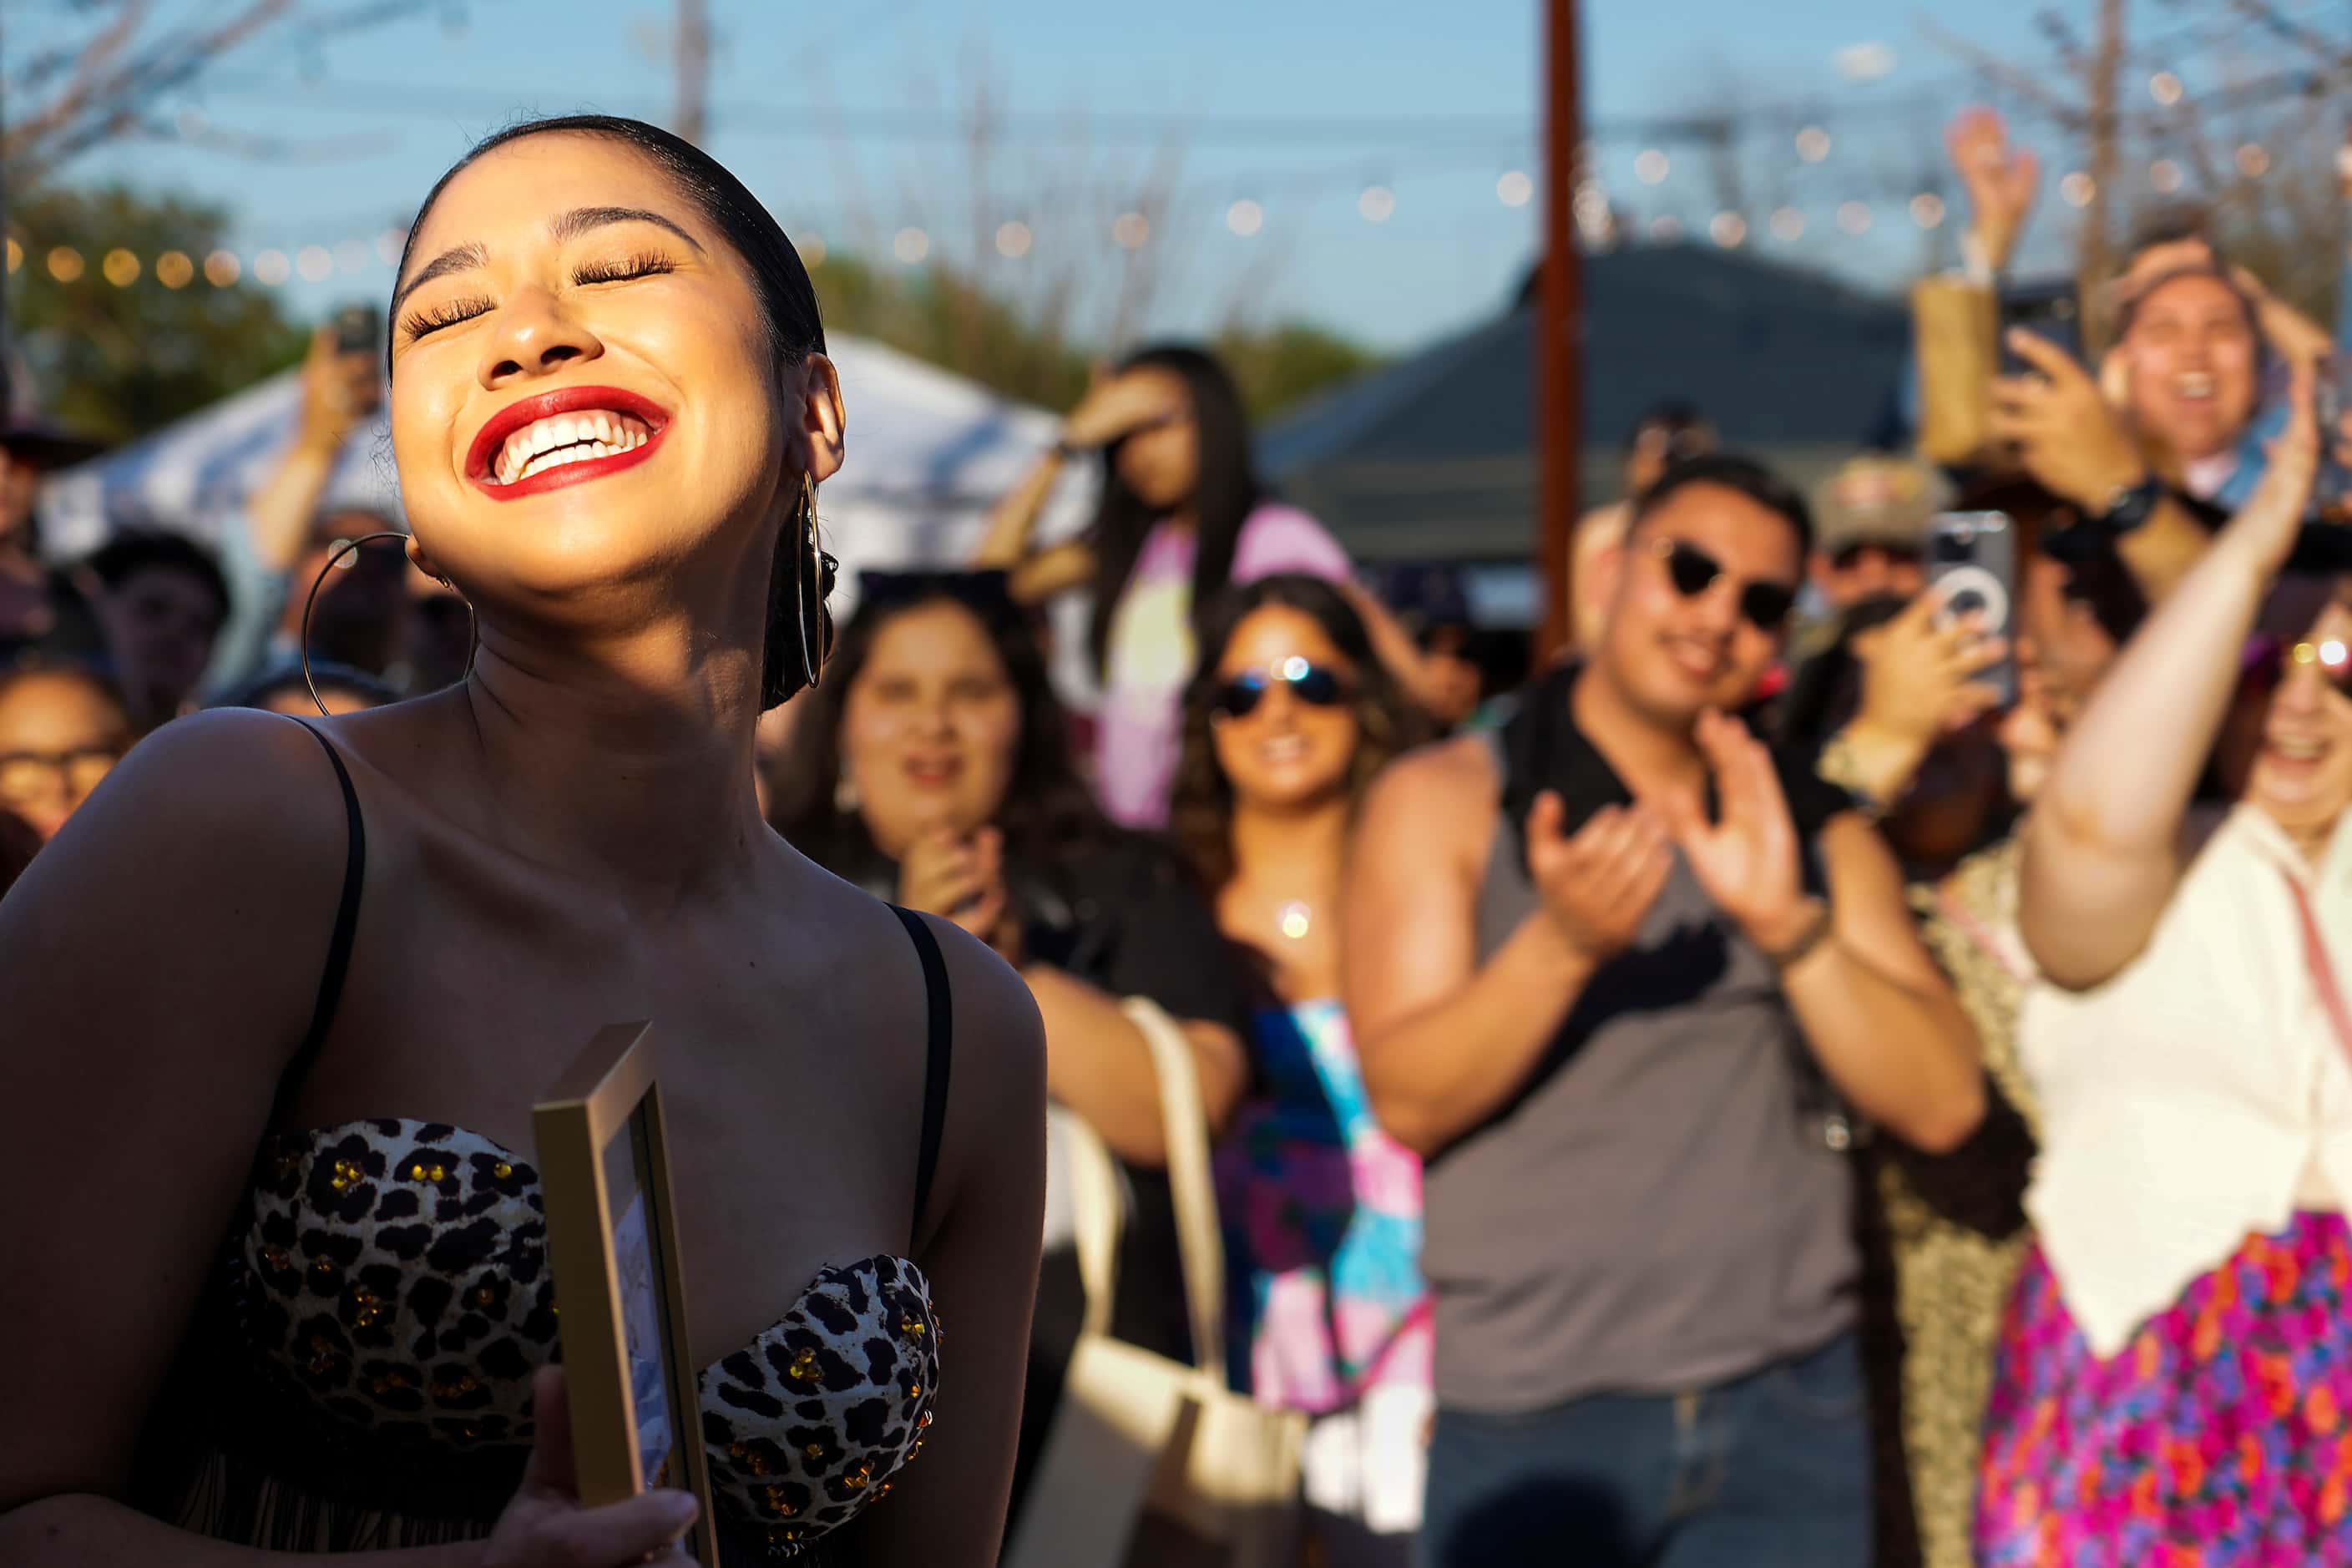 Olly Cruz reacts after she was named the winner in a Selena Quintanilla-Pérez look-alike...